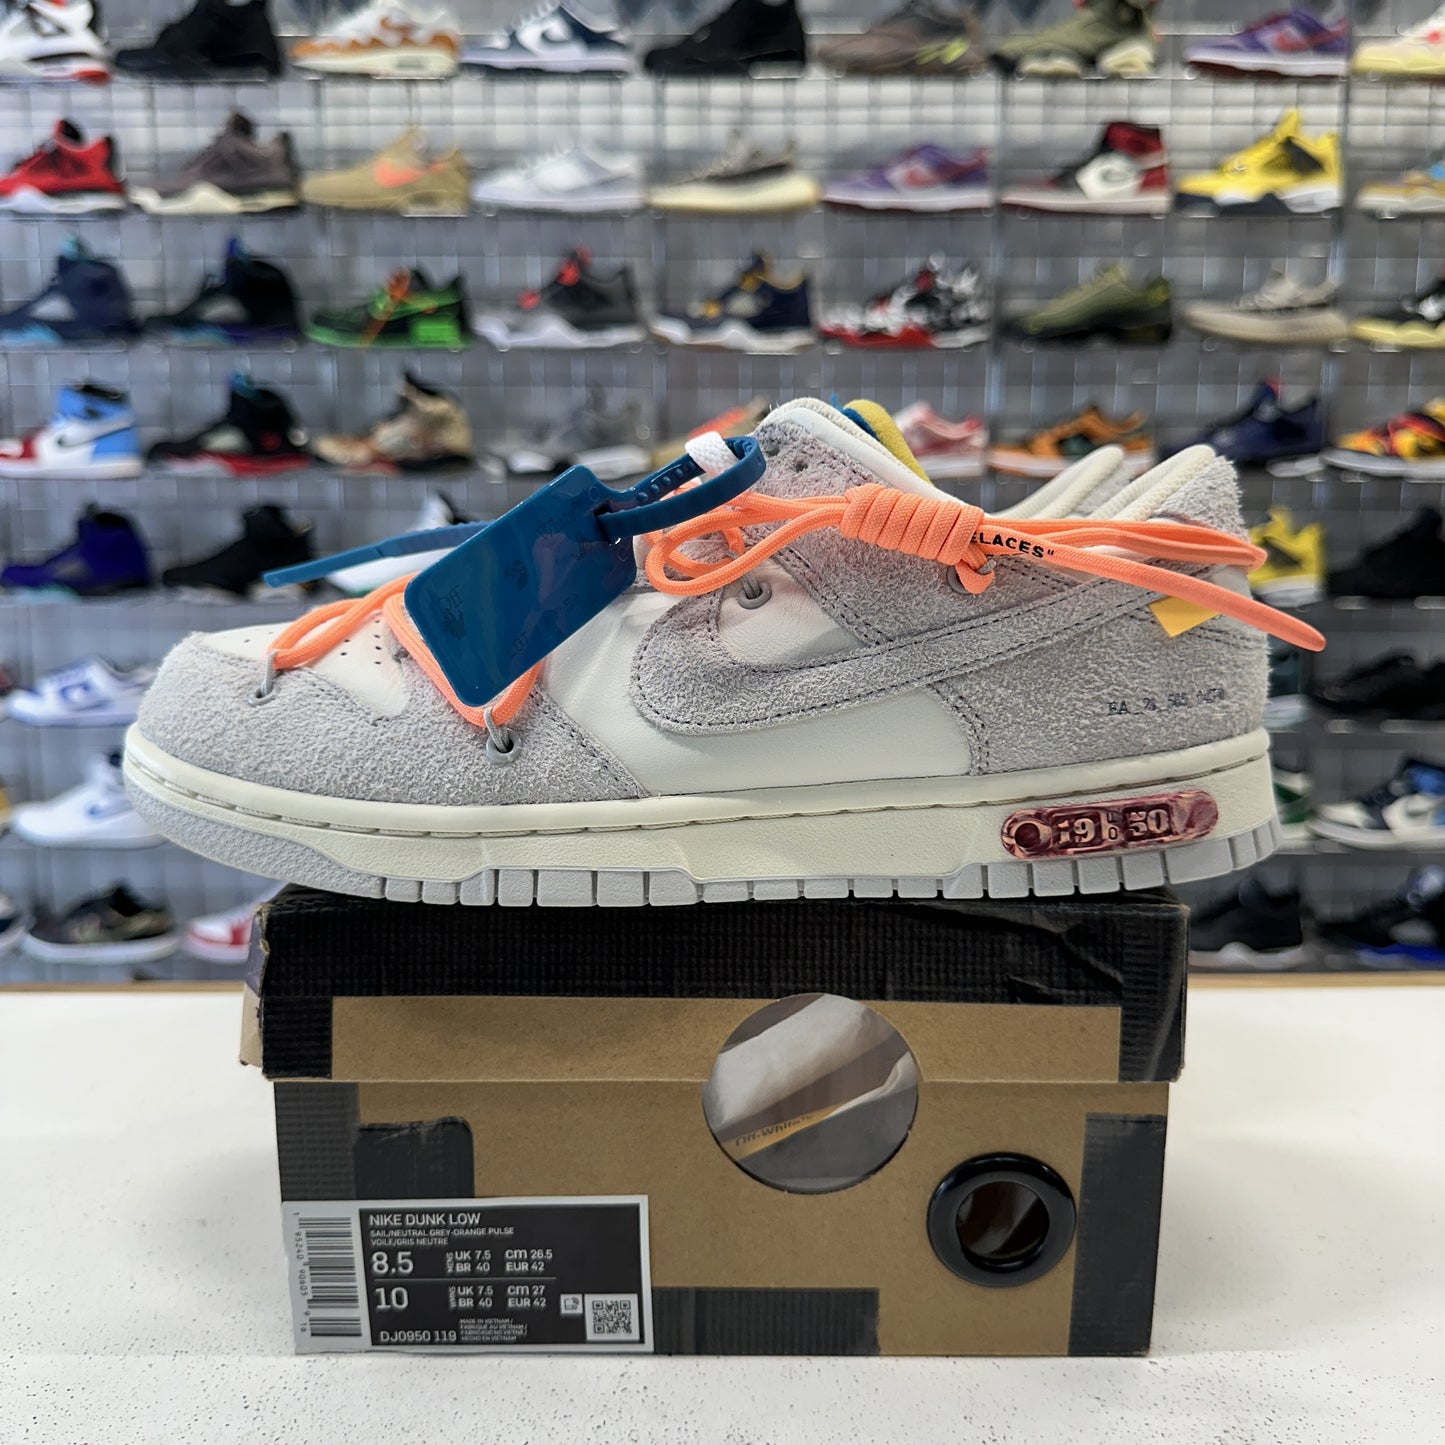 Off-White x Nike Dunk Low 'Lot 19 of 50' UK7.5